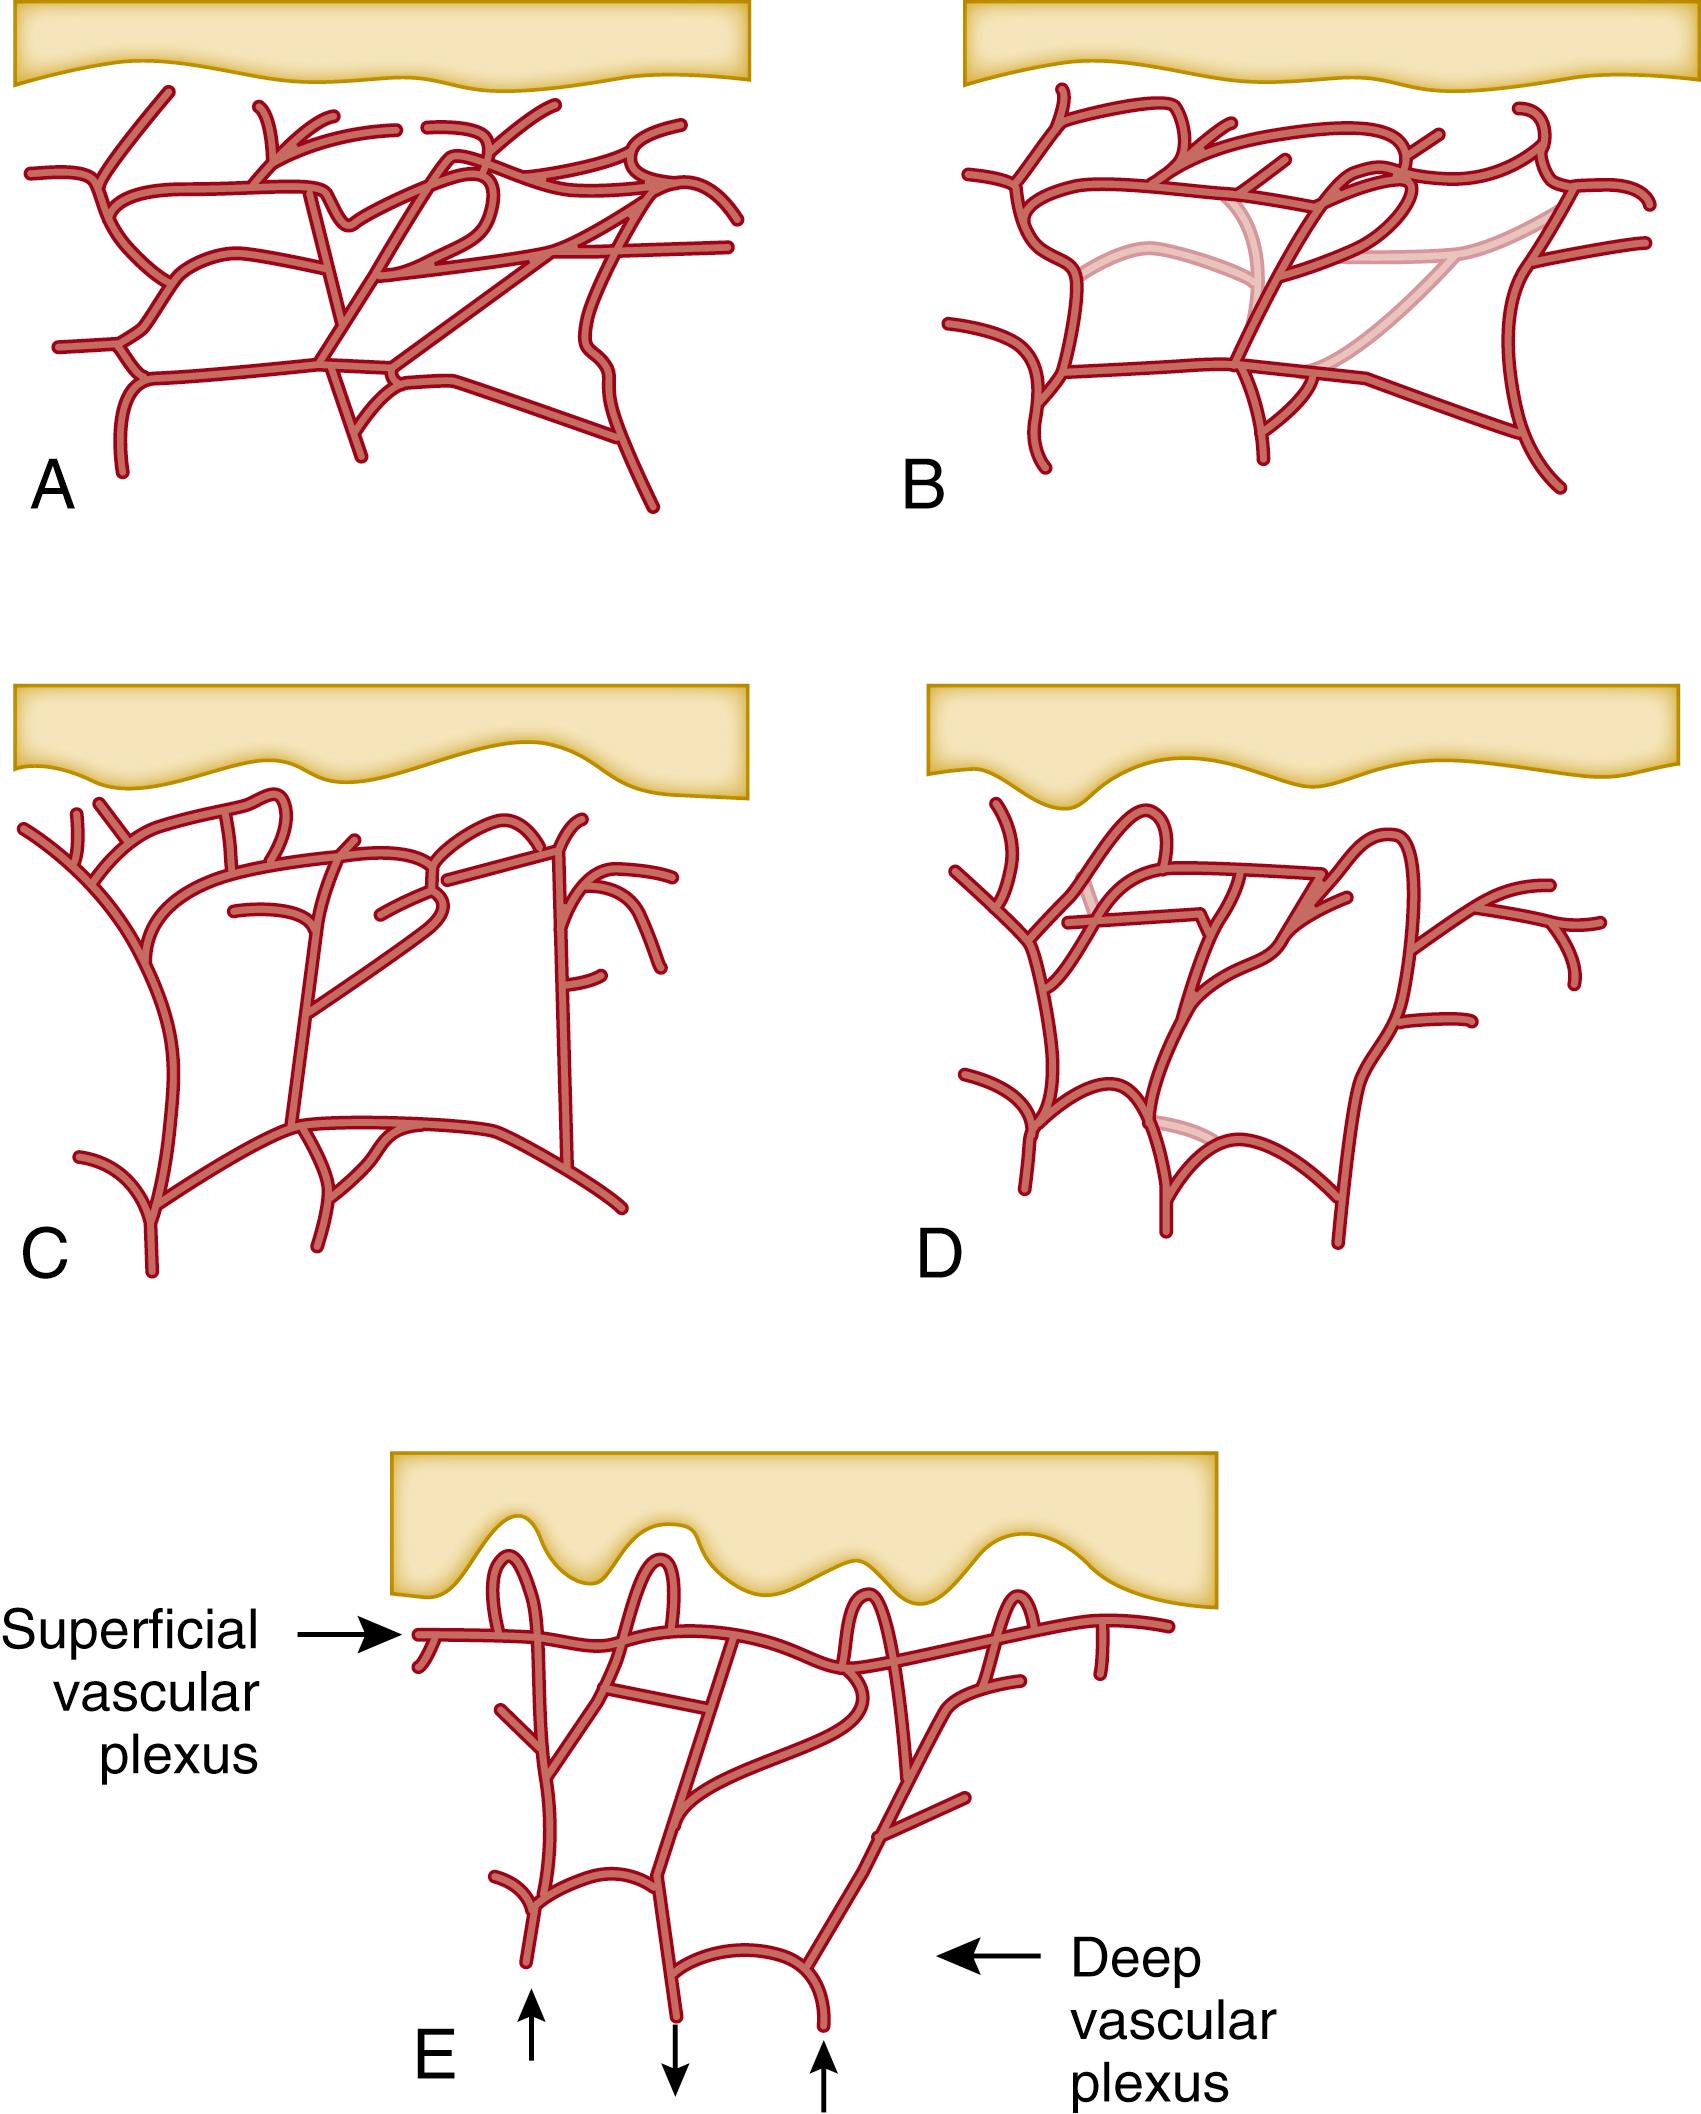 Fig. 44.7, The blood supply at birth. The gradual development of papillary buds and organization of the subpapillary plexus from birth (A) to 3 months of age (B–D) and the vascular pattern at 3 months of age (E). The arrows (E) show the direction of blood flow for arteriolar and venous systems.